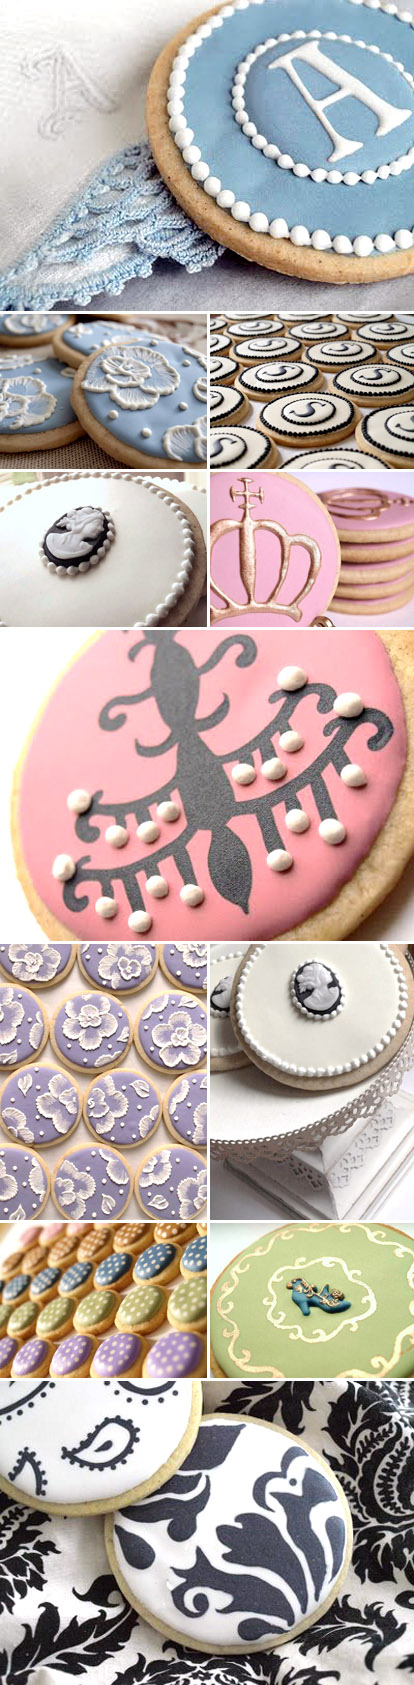 custom decorated wedding sugar cookies in damask, monogram, cameo, and fabric embroidery by SweetAmbs